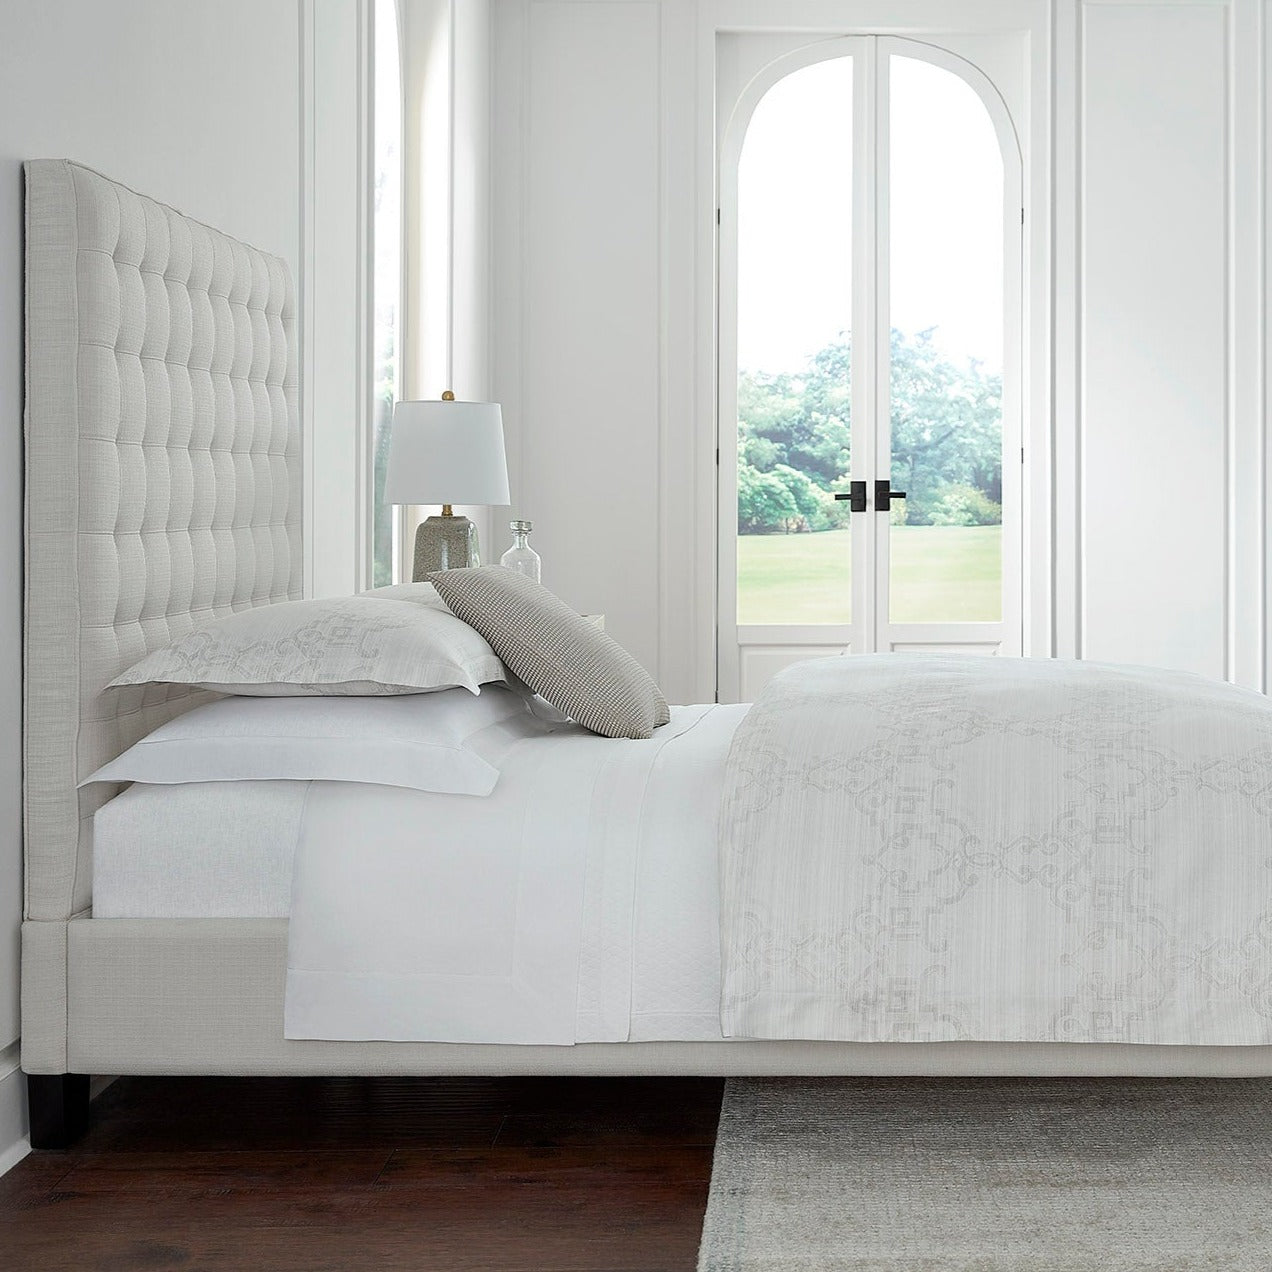 Laterina Bed Linens